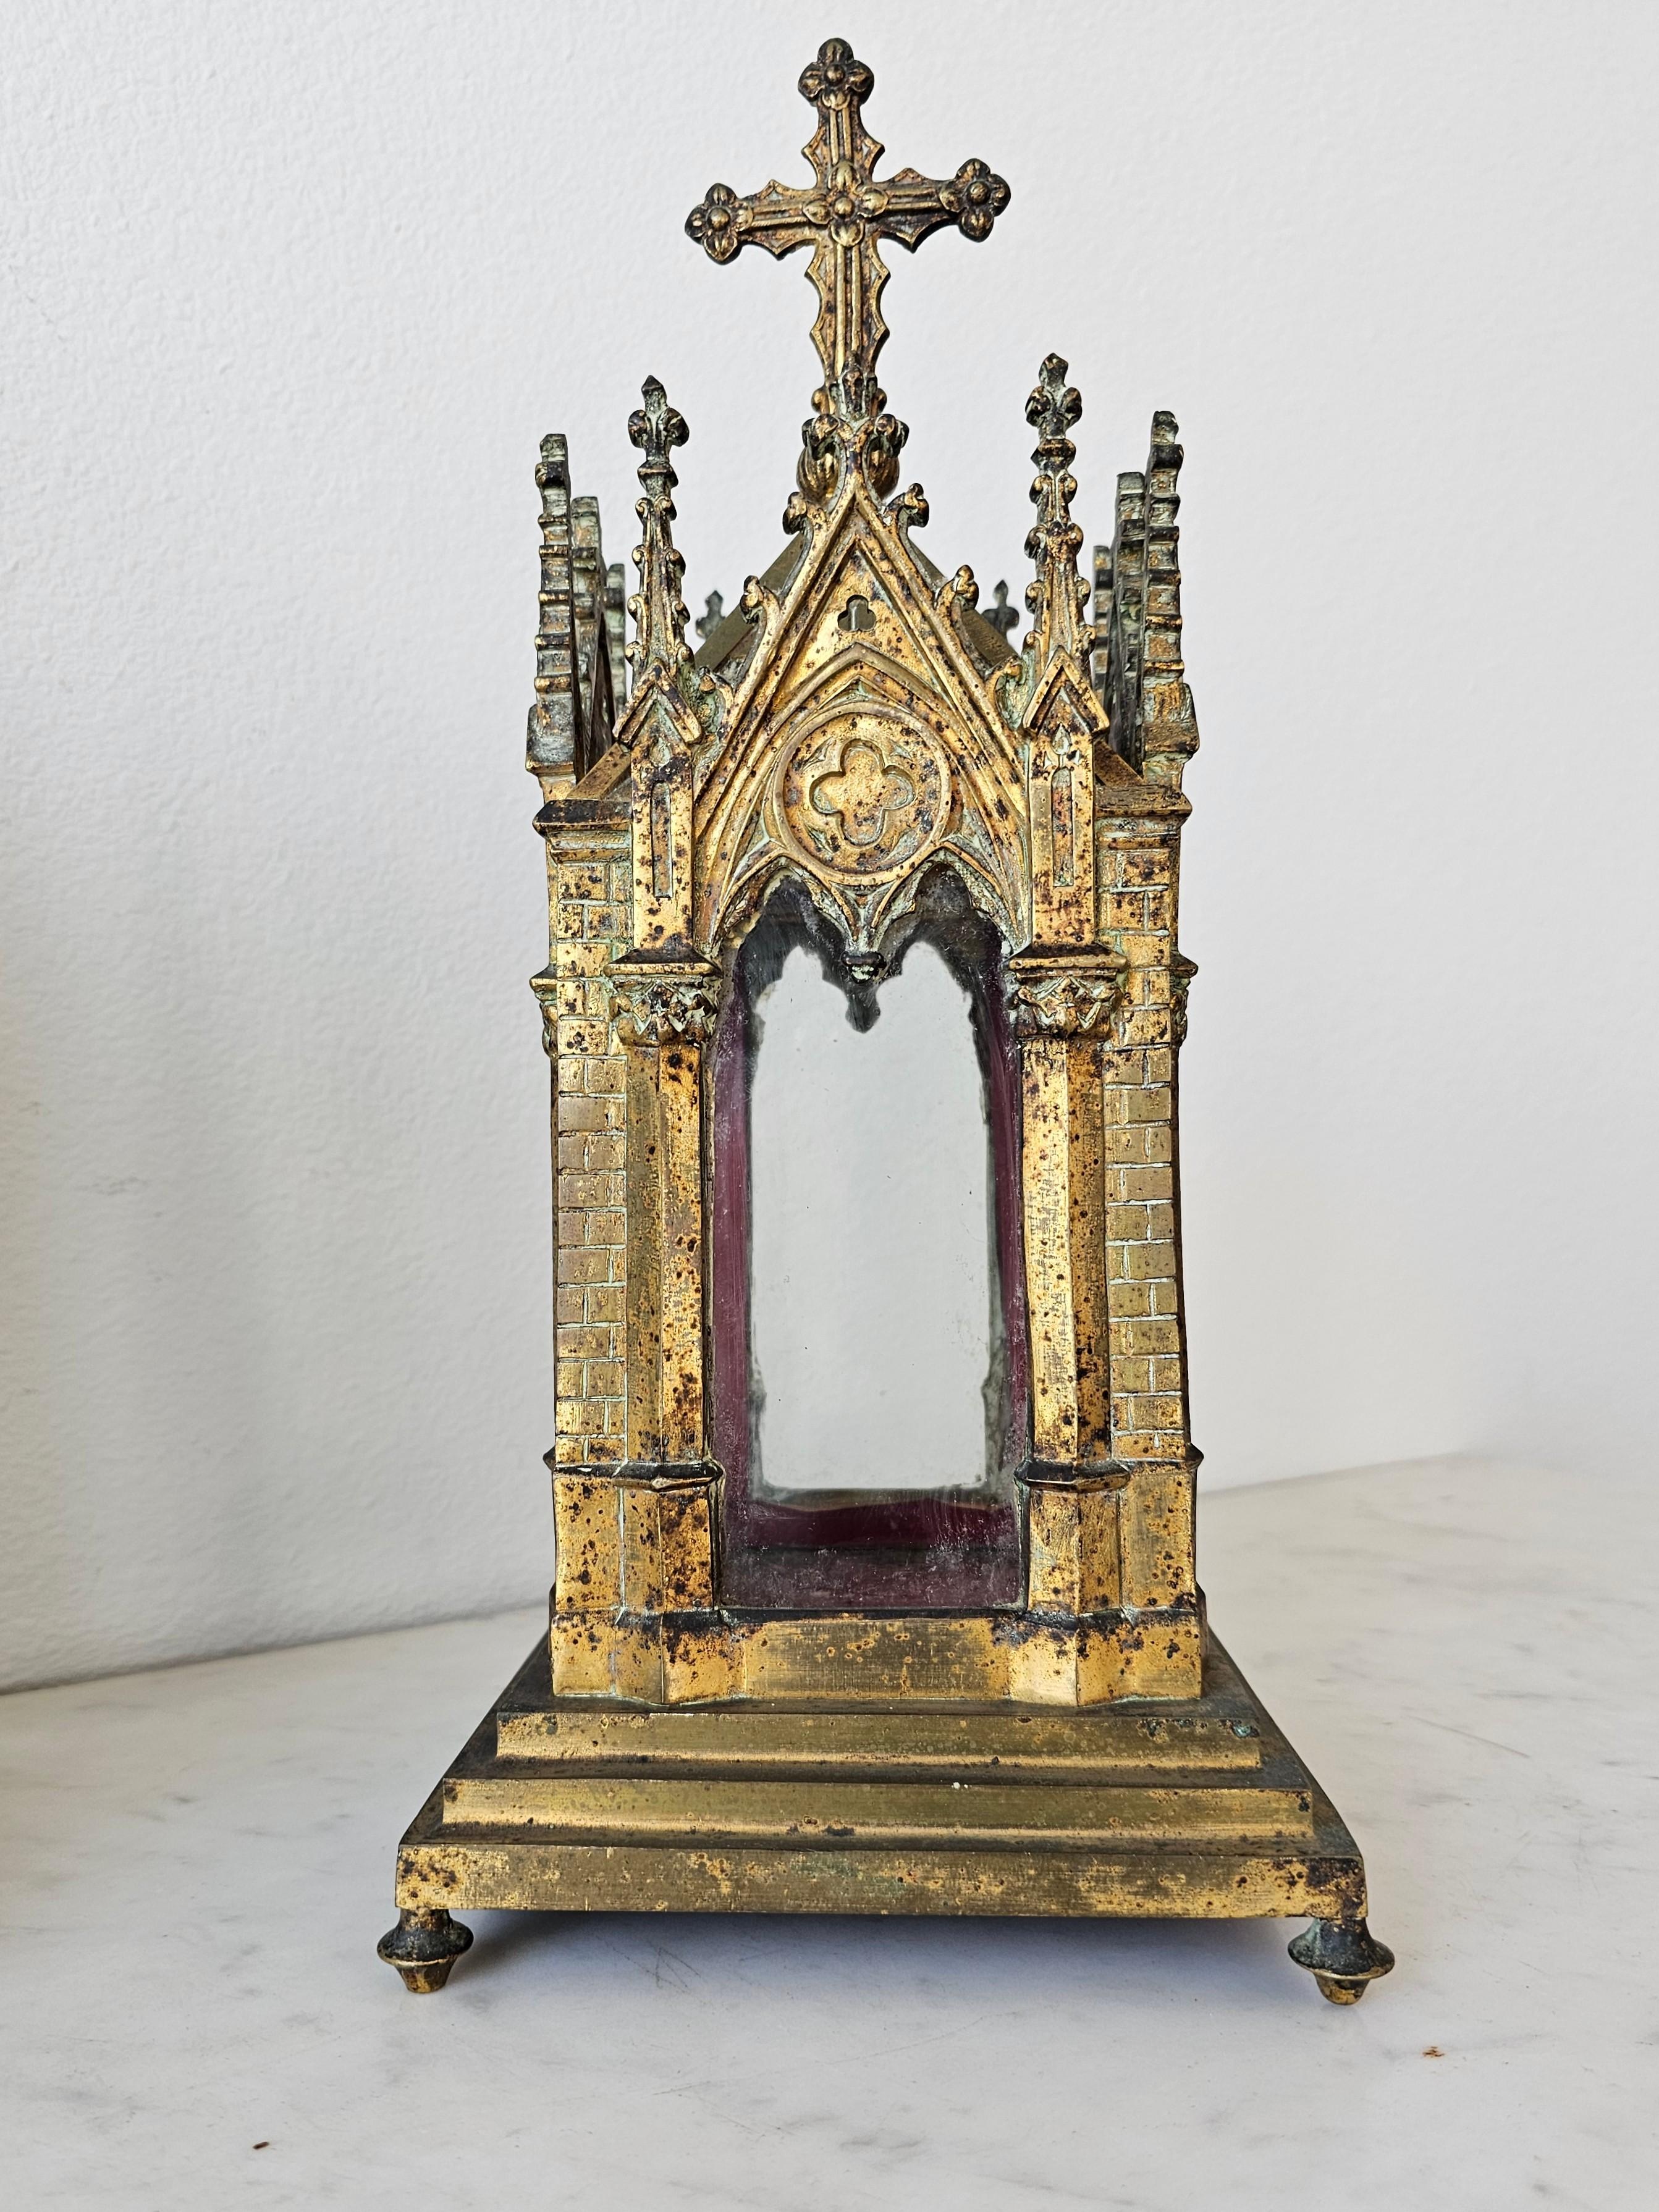 A stunning pair of very fine quality French Neo-Gothic gilt metal church reliquaries. circa 1860s

Most impressive objets d’art, born in France in the second half of the 19th century, most likely Parisian gilded bronze and brass ormolu work,